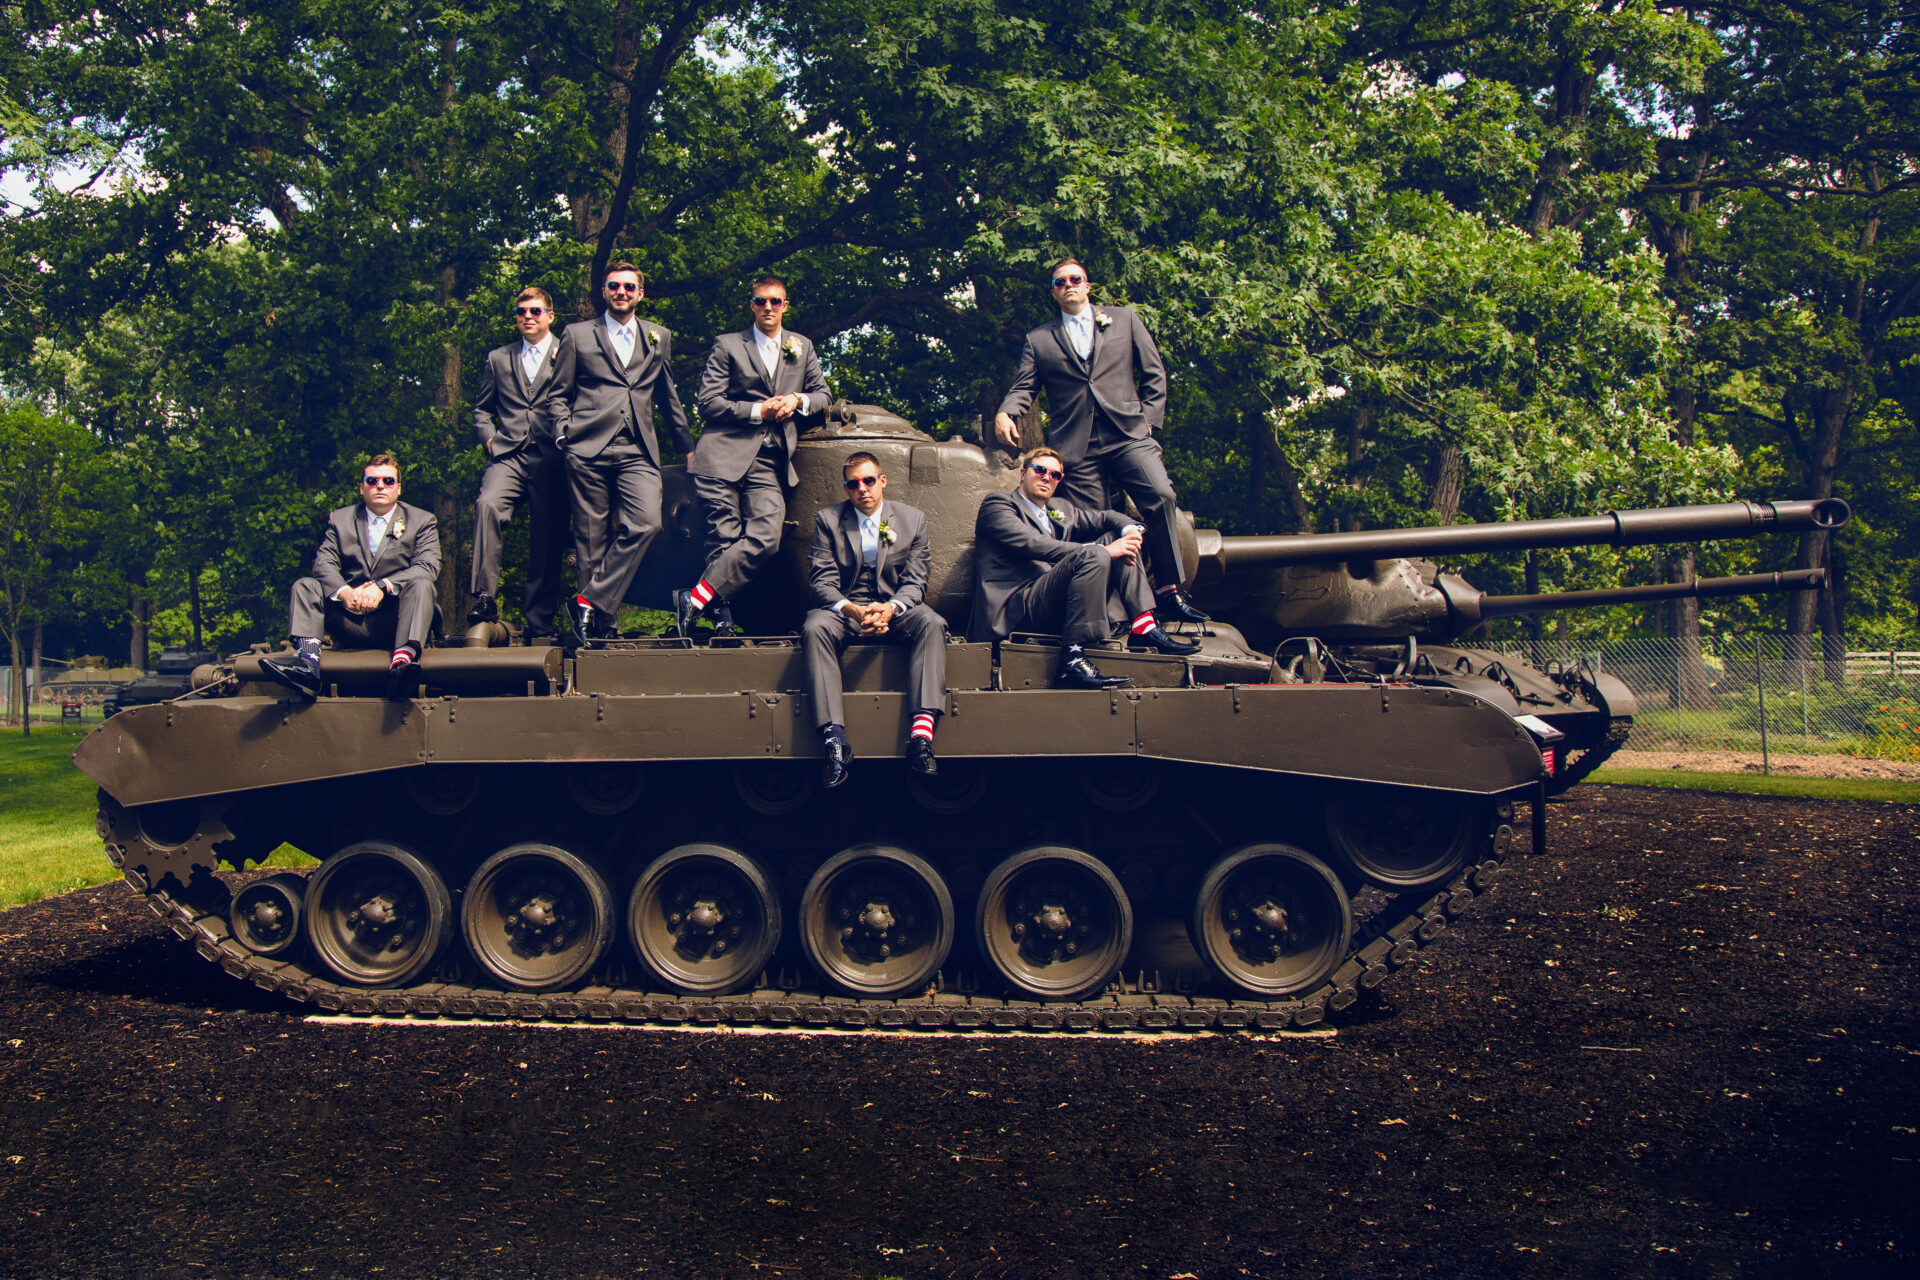 Military wedding photo session with a tank by Astrapia Photography